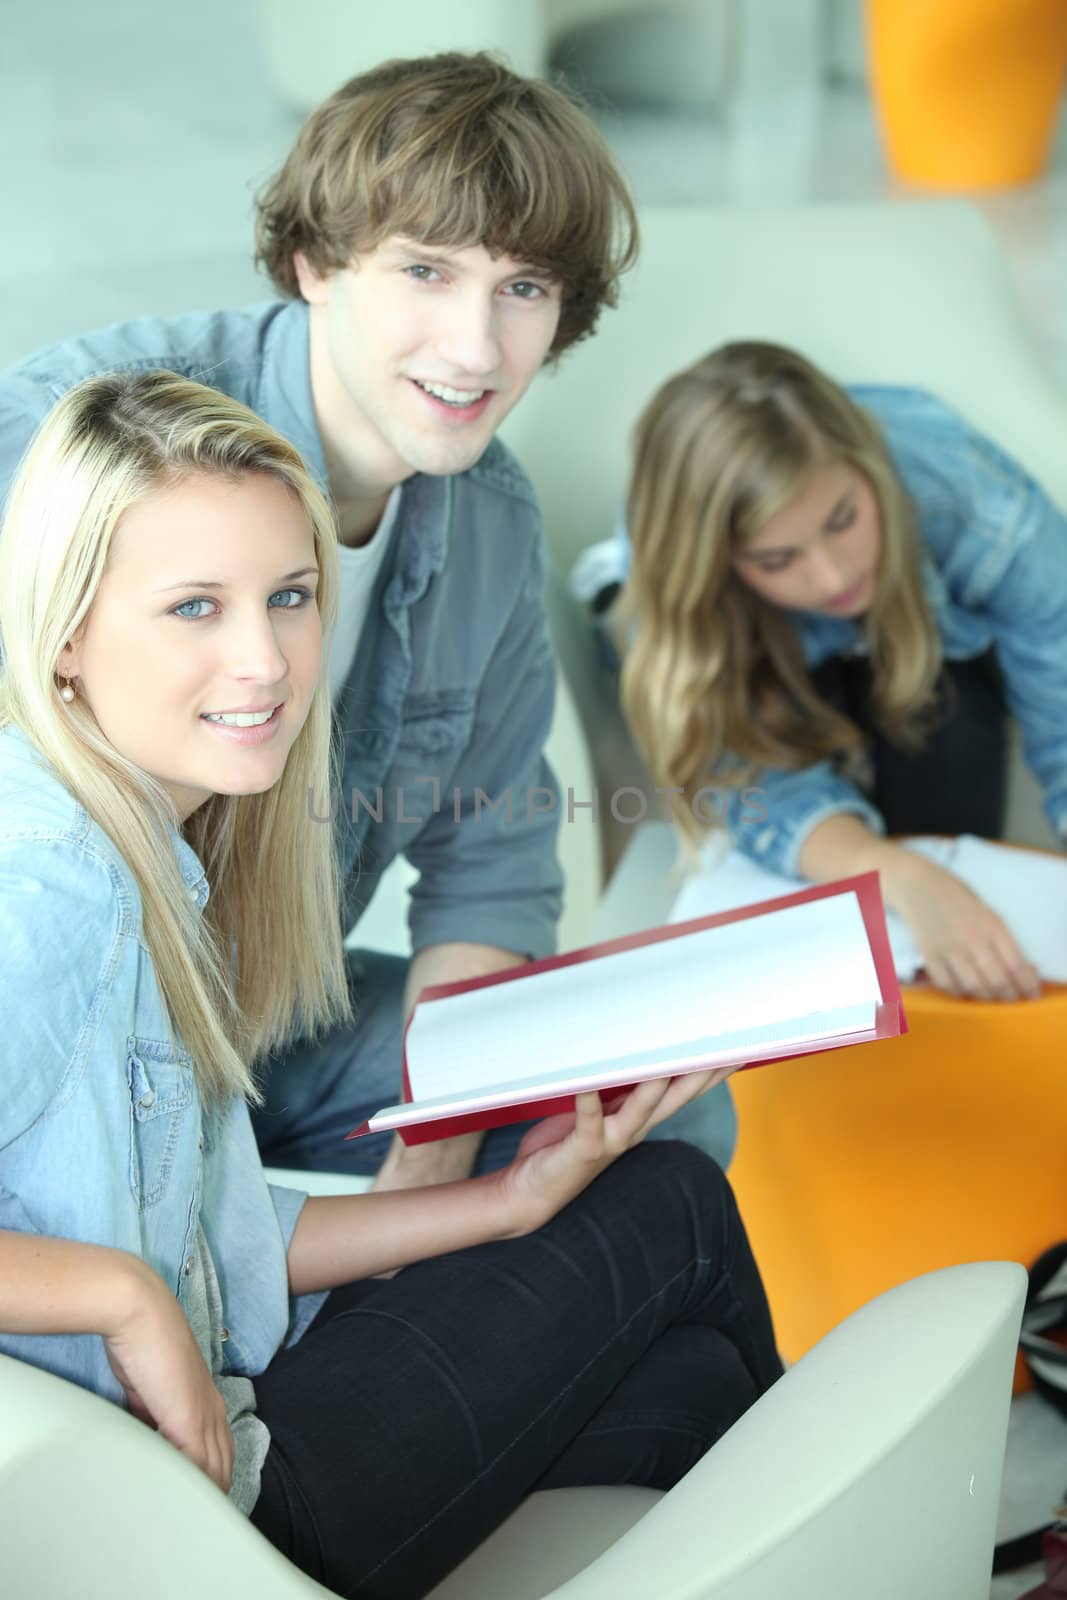 Students in a common room discussing an assignment